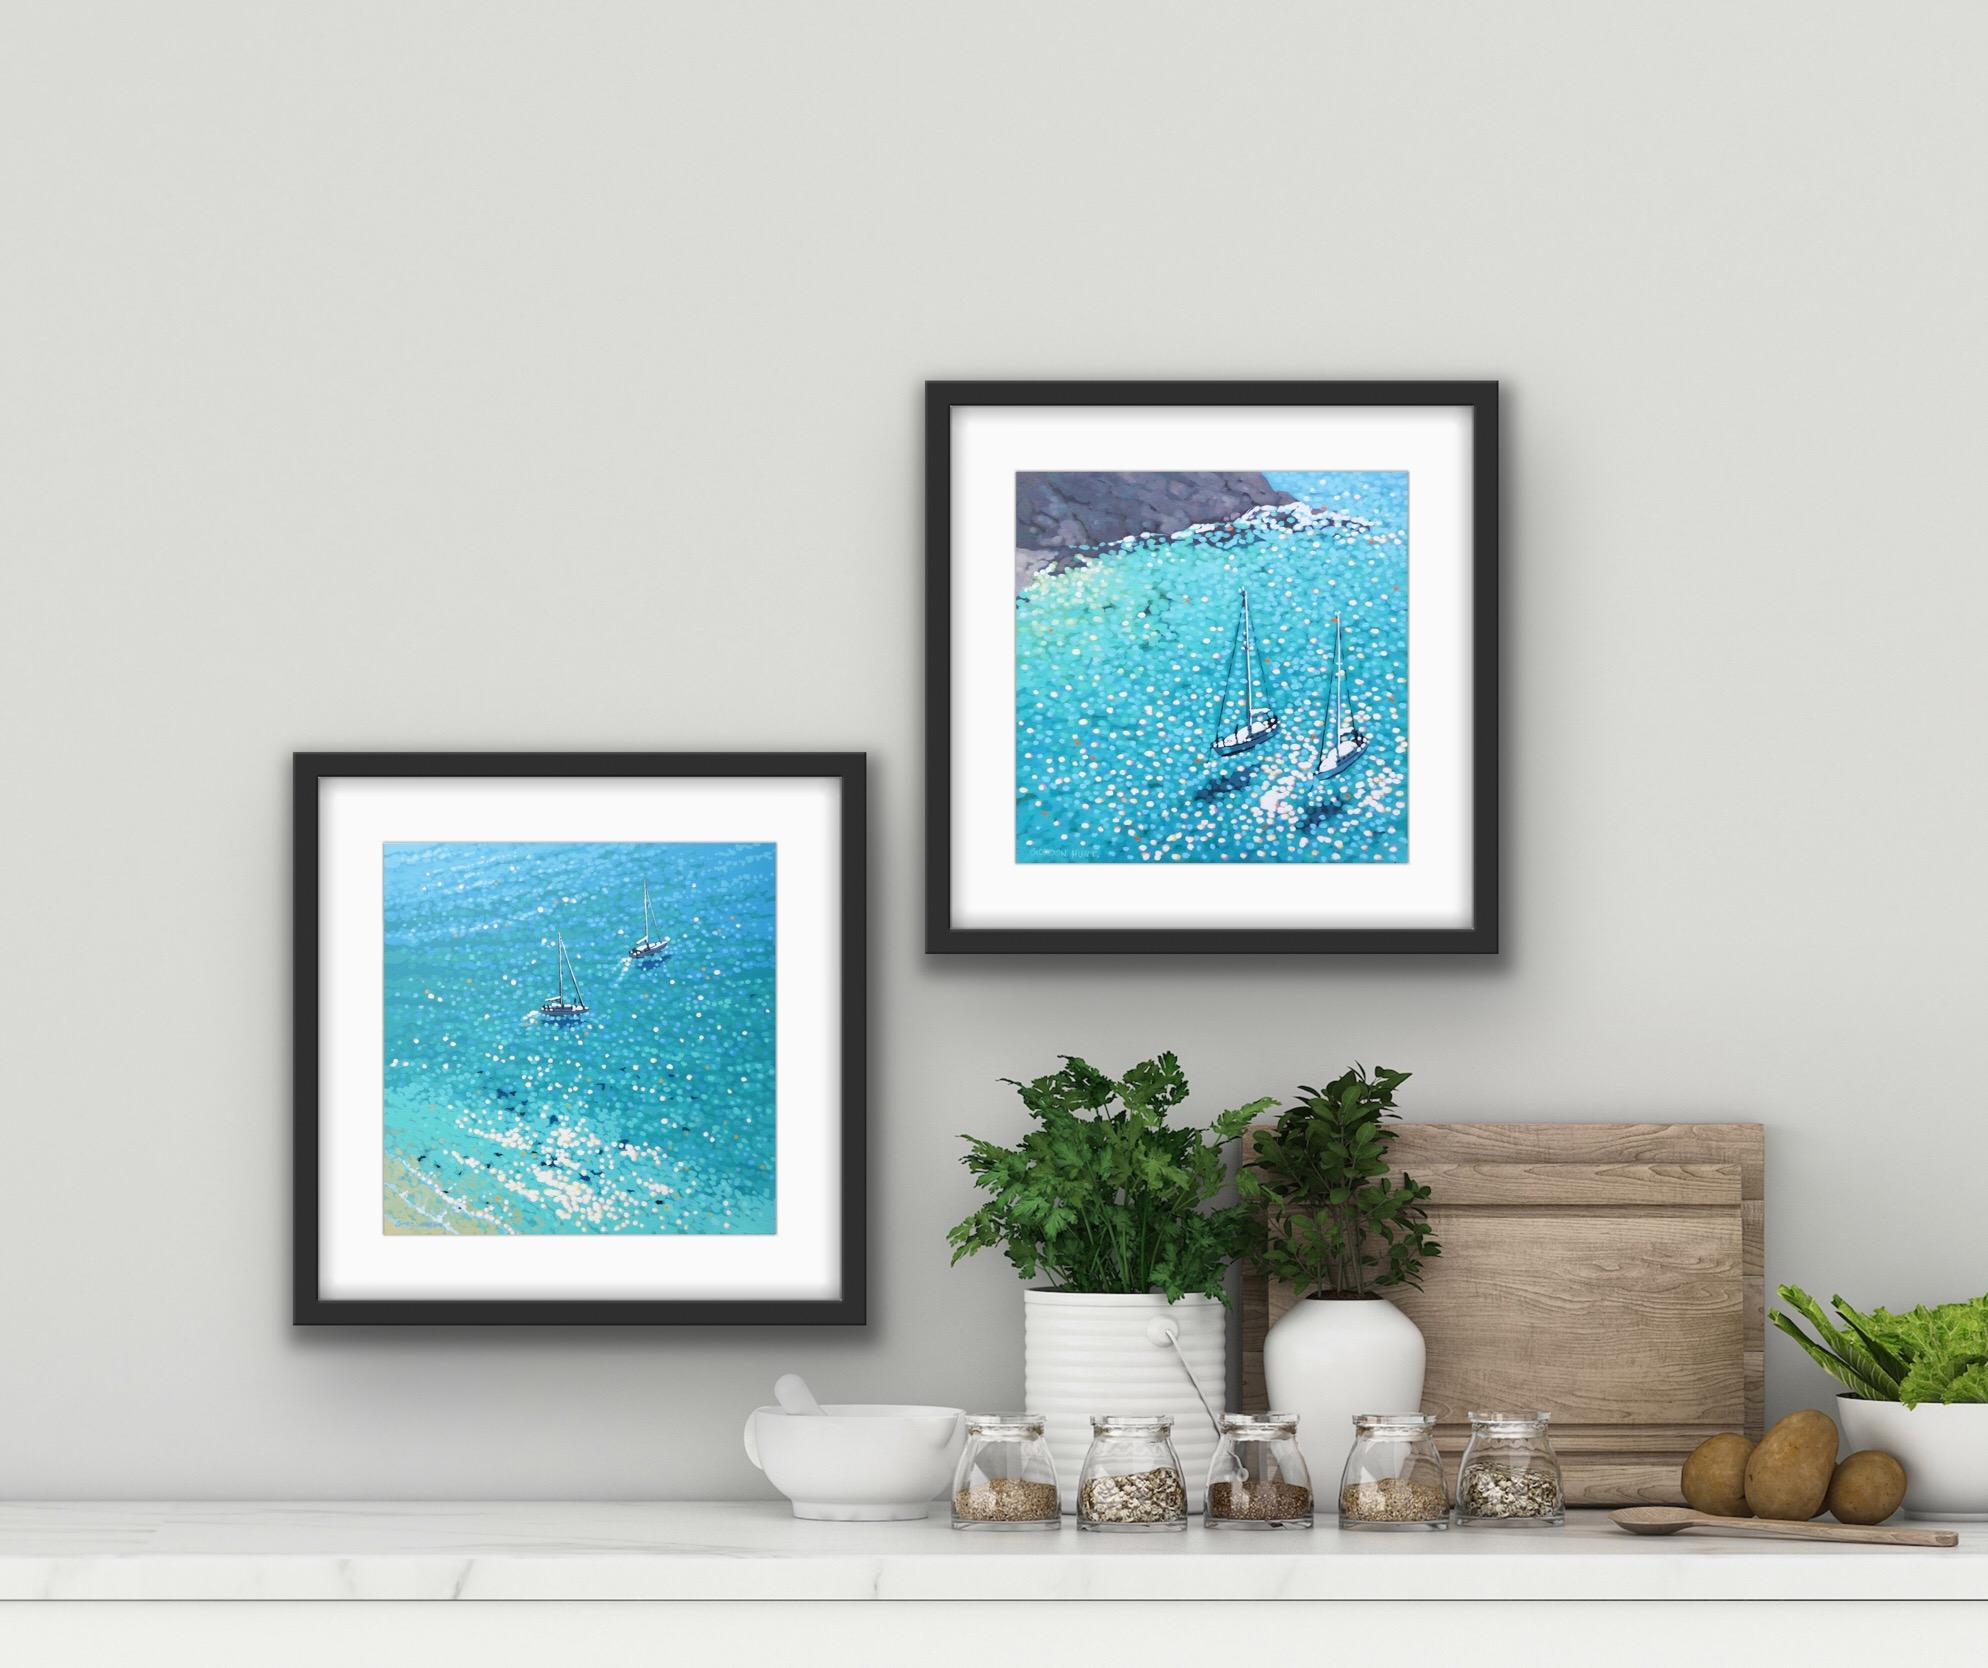 Turquoise Bay and Lantic Lunch (small) Diptych - Gray Landscape Print by Gordon Hunt